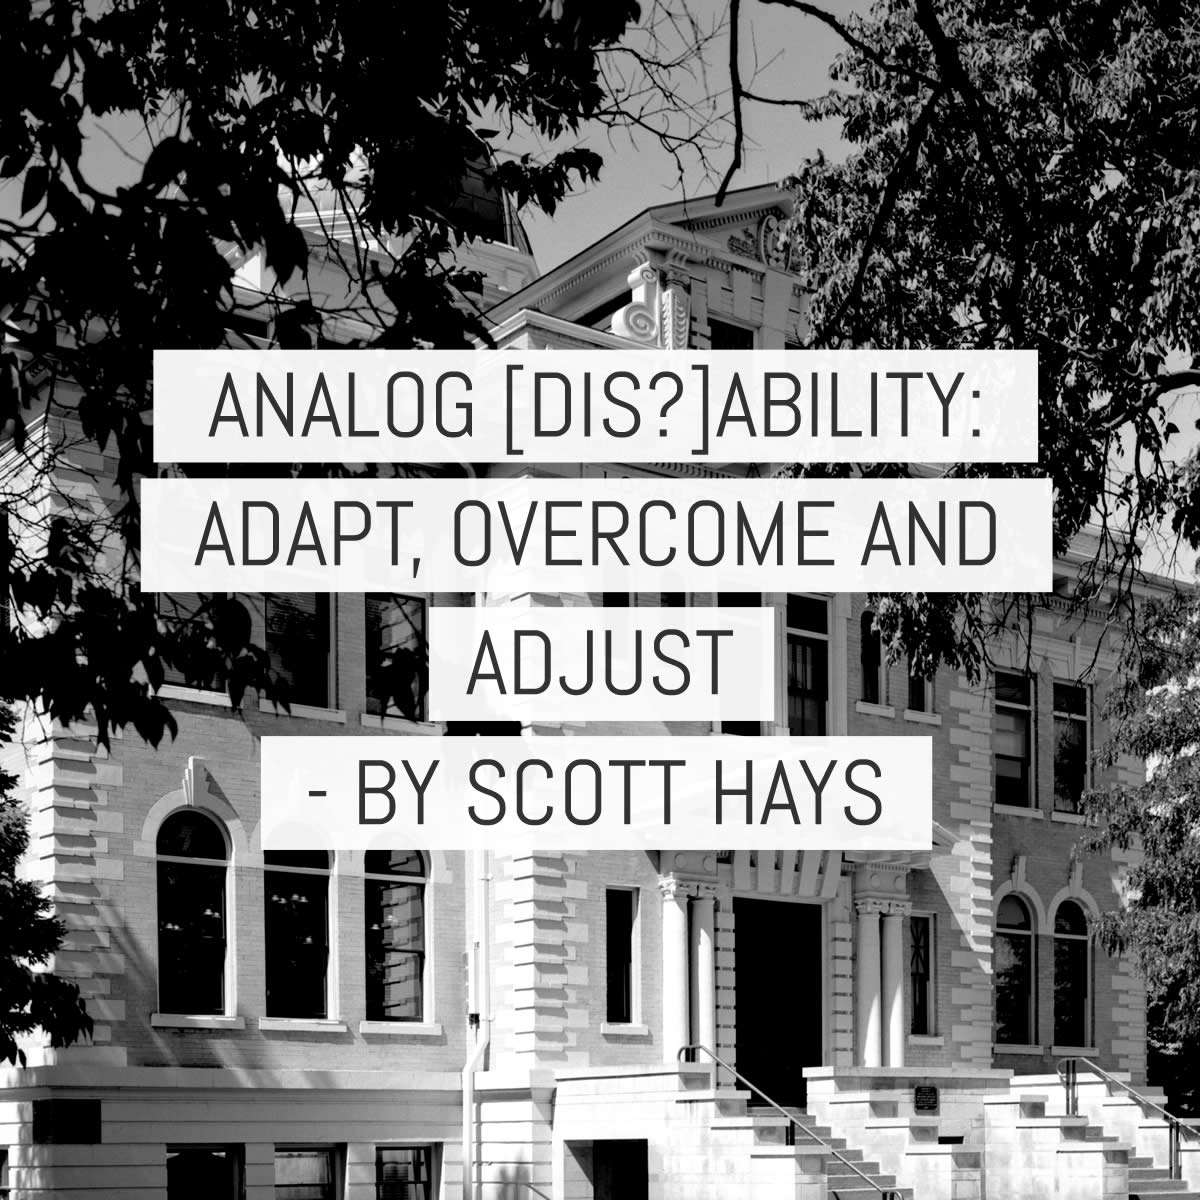 Analog (dis)ability - Adapt, overcome and adjust